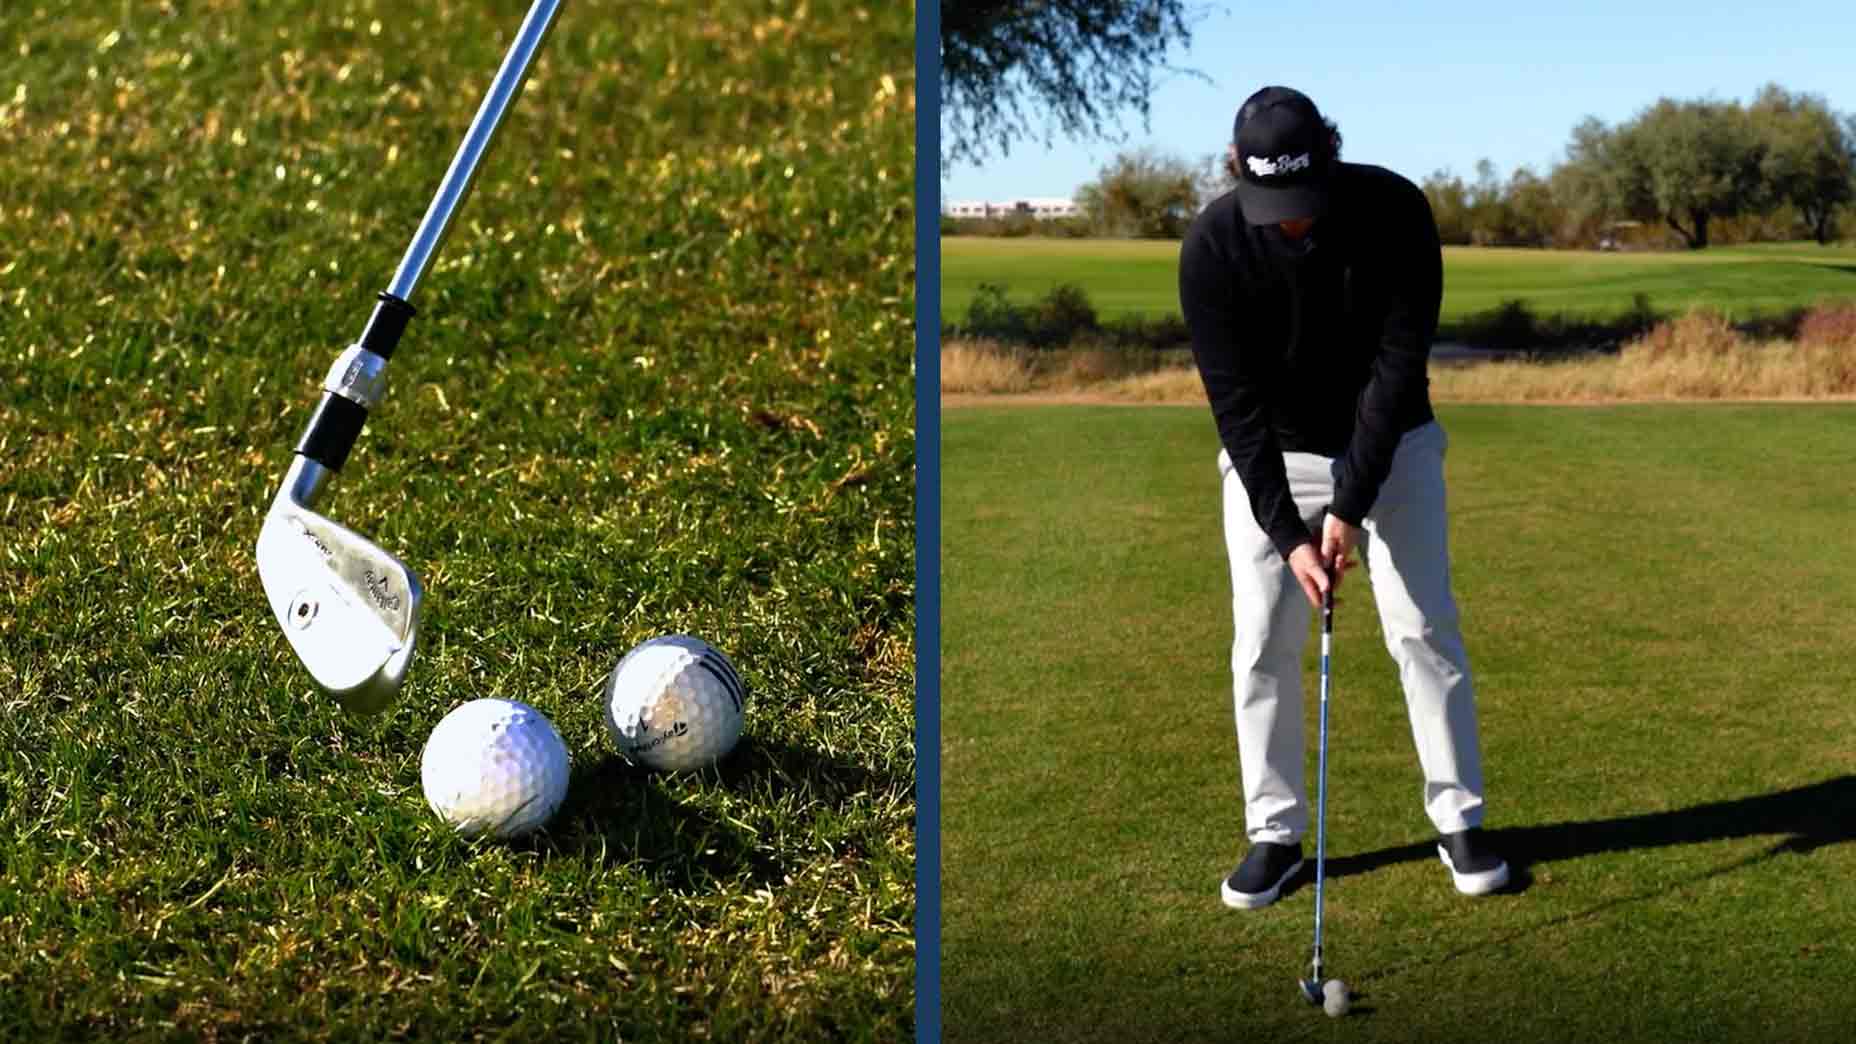 If you're struggling with hitting shanks, GOLF Teacher to Watch Mike Bury shows how a simple 2-ball drill can help correct them